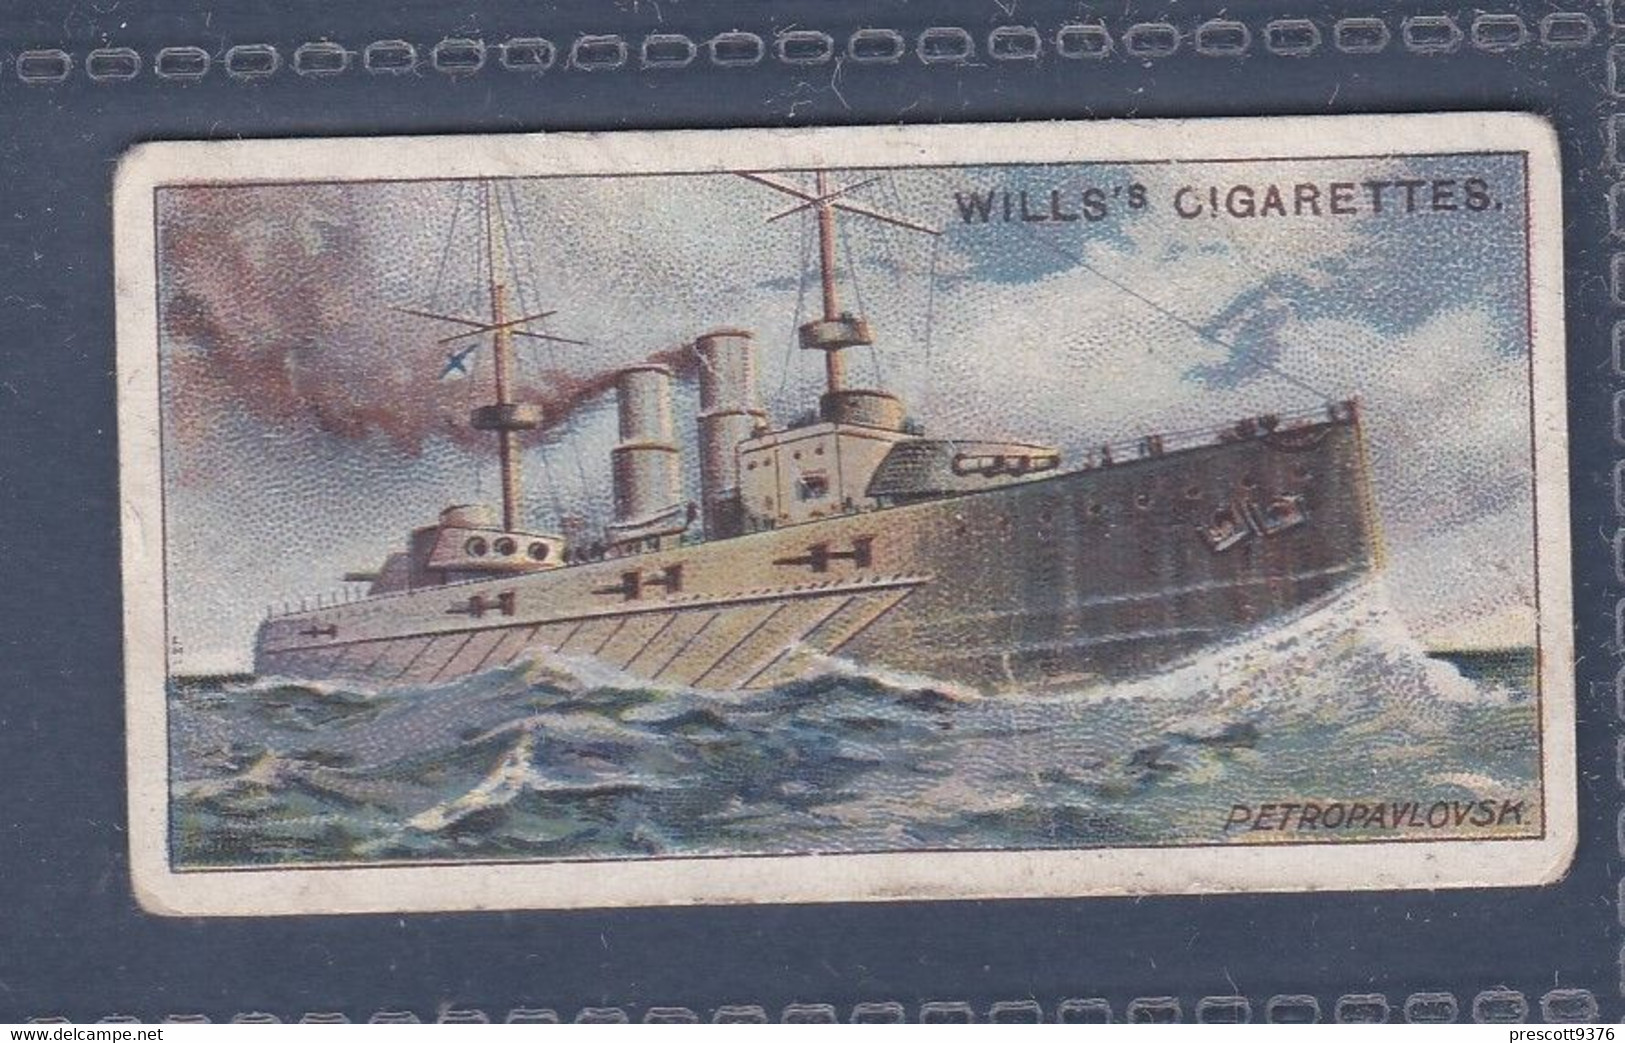 The Worlds Dreadnoughts 1910 - 21 "Petropatlovsk" Russia - Wills Cigarette Card - Original  - Antique - Military - Ships - Wills